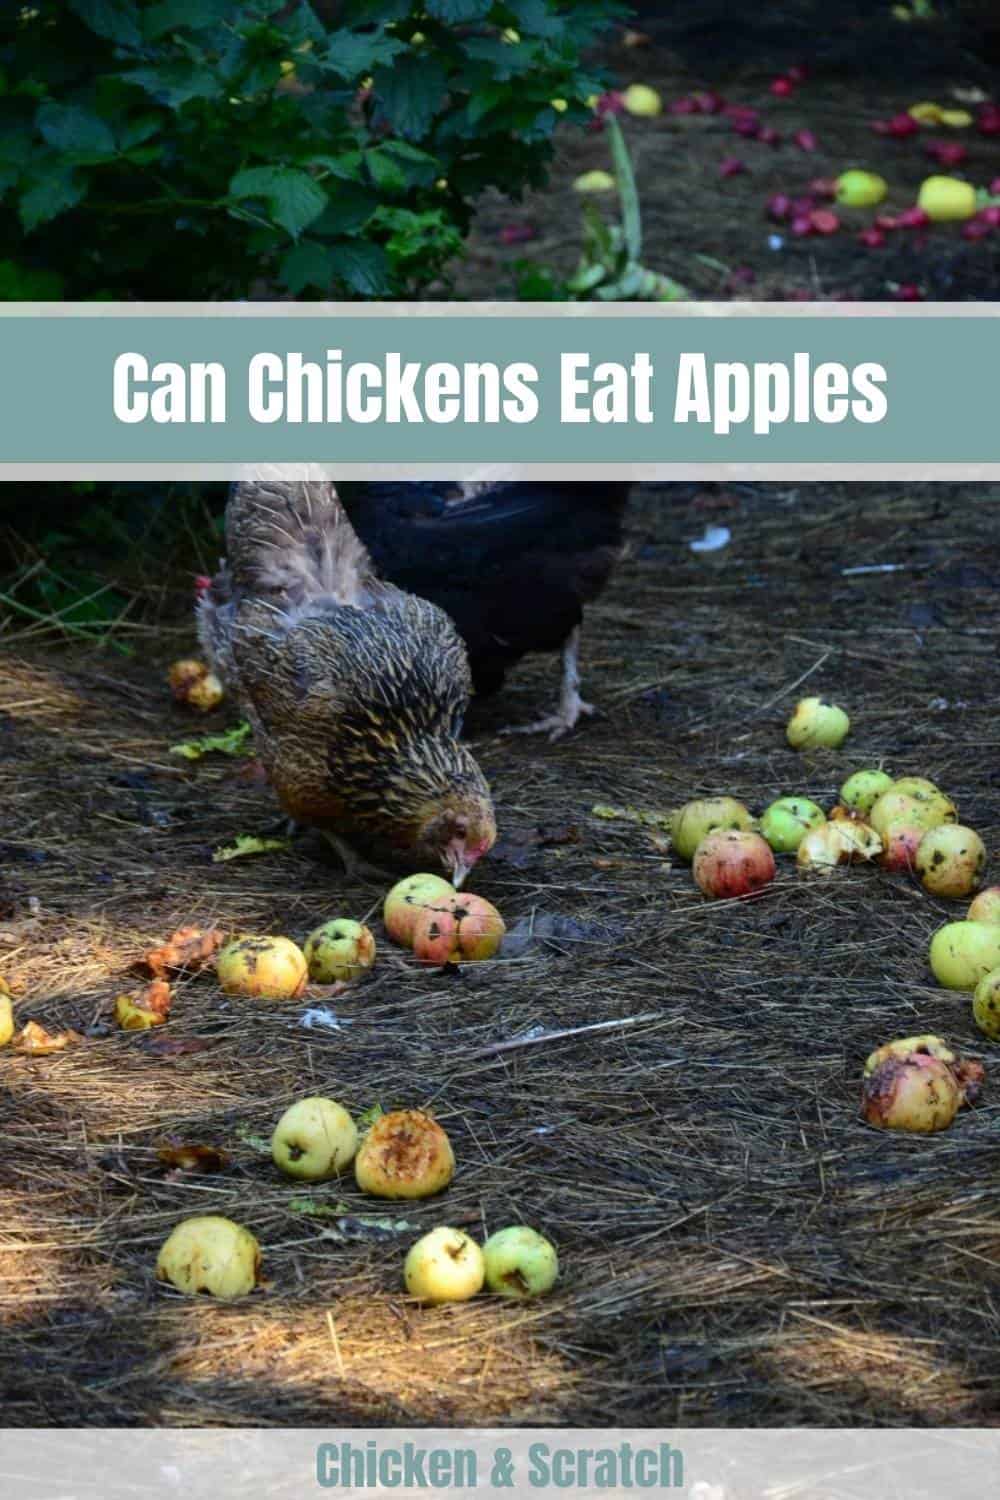 Can Chickens Eat Apples? (Peel, Seed, Core, Flesh)